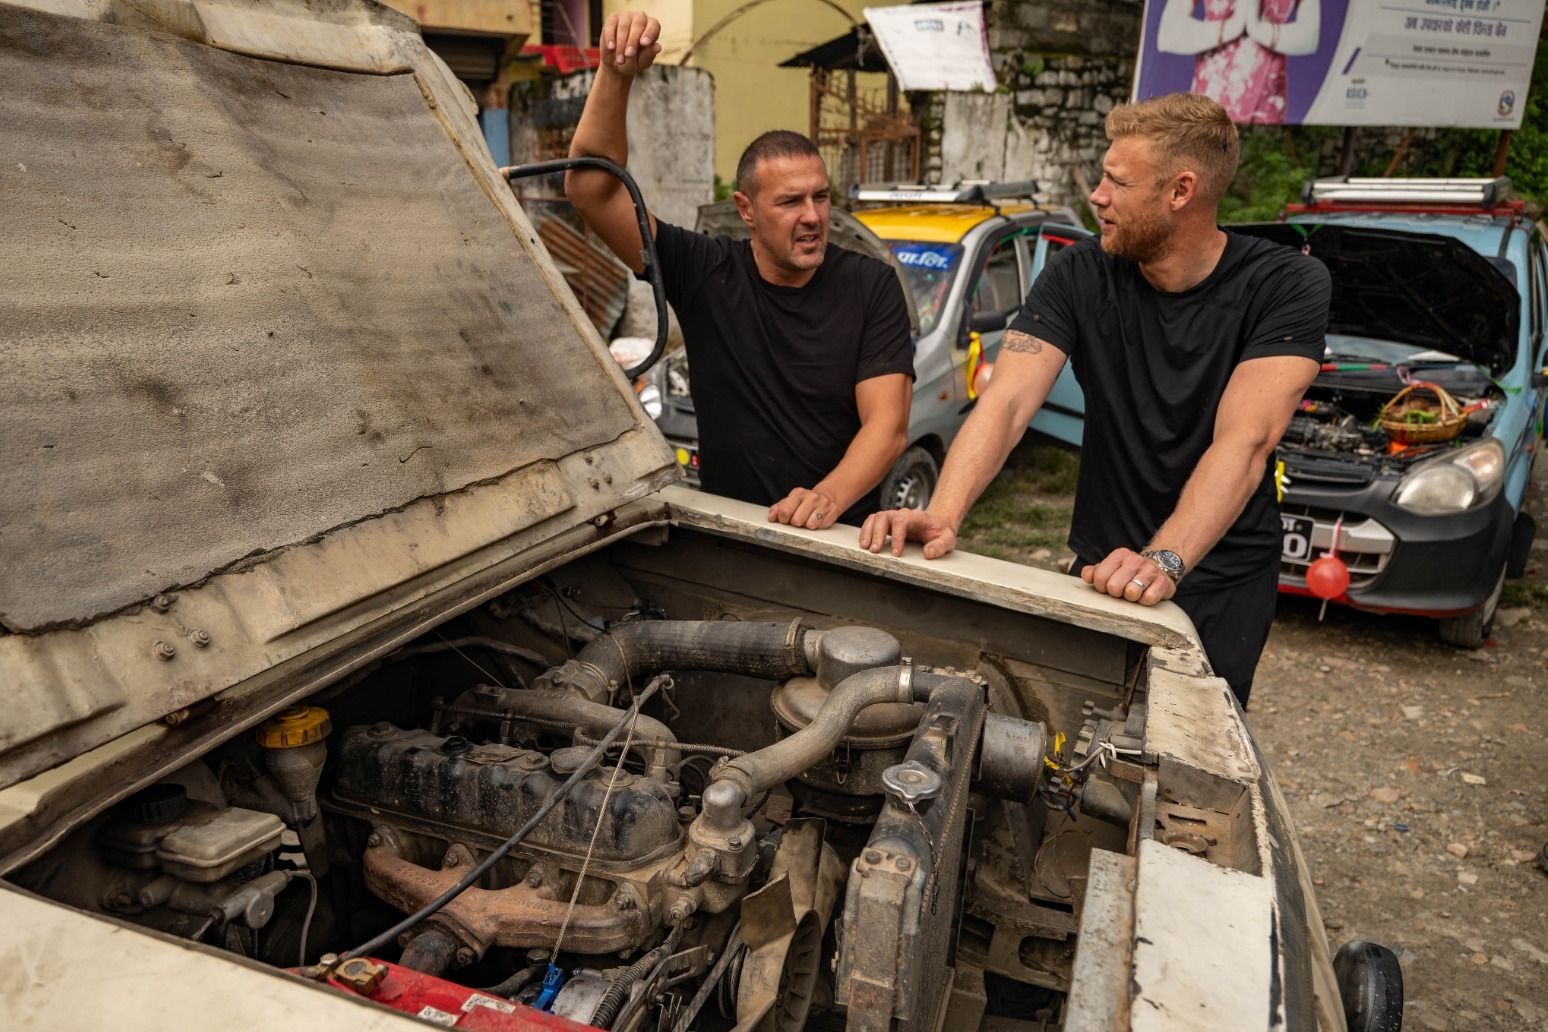 Top Gear host Andrew Flintoff injured in accident while filming show 